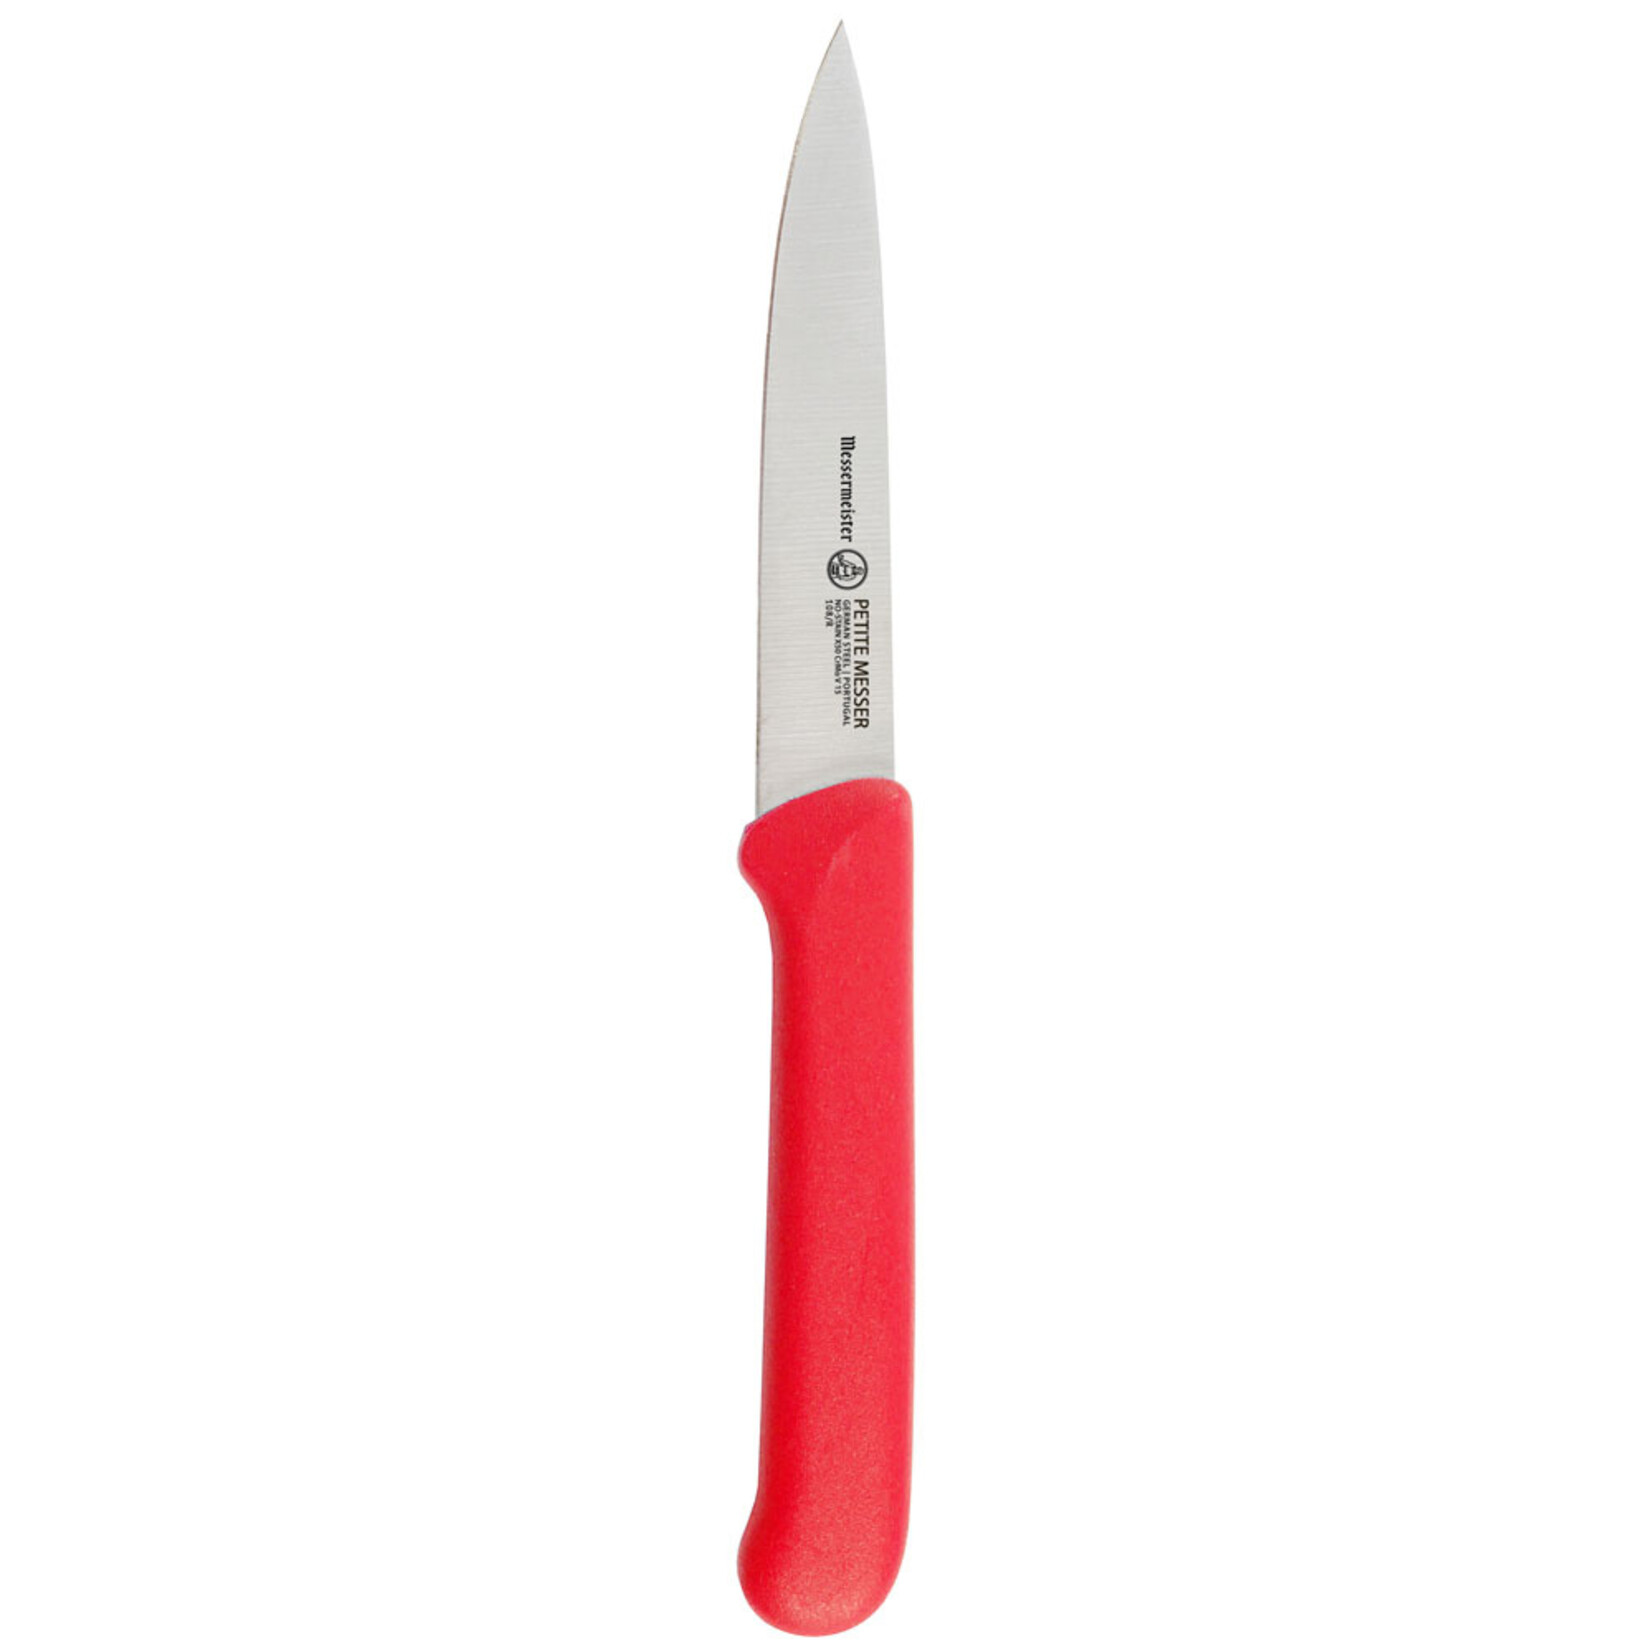 Messermeister 4 Inch Spear Point Paring Knife with Matching Sheath in Red